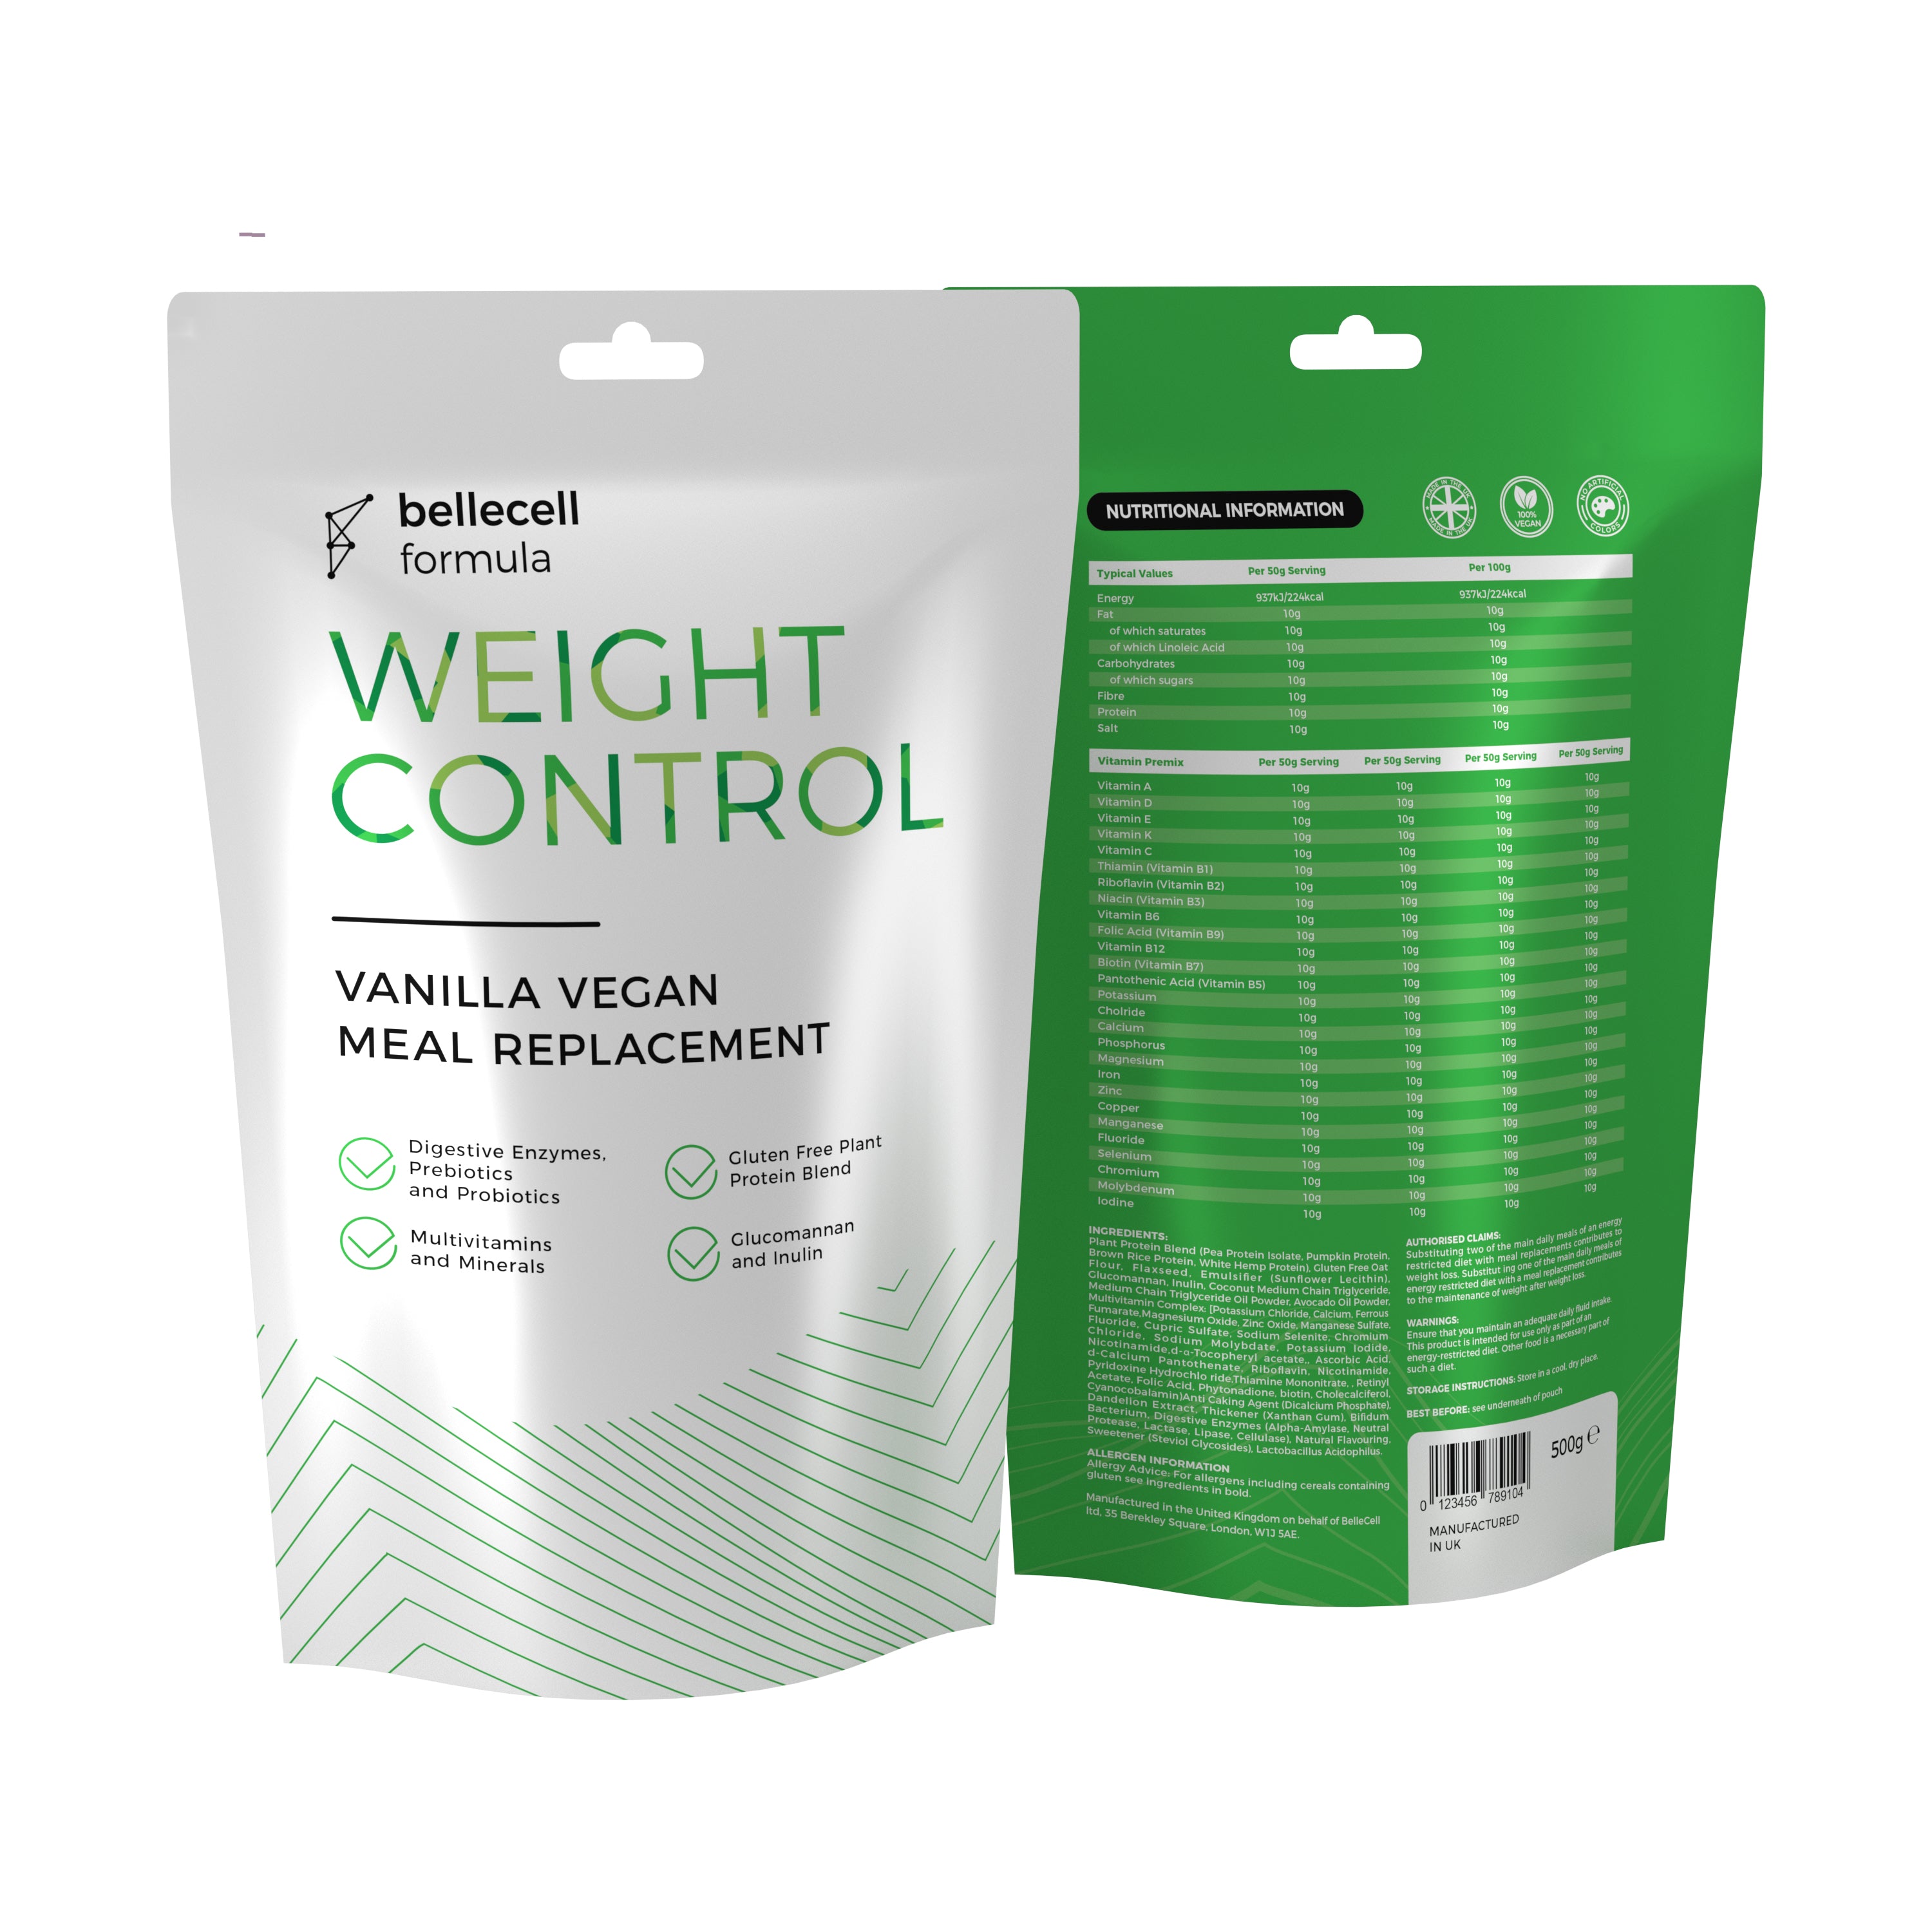 WEIGHT LOSS <br> Vegan Meal Replacement Formula